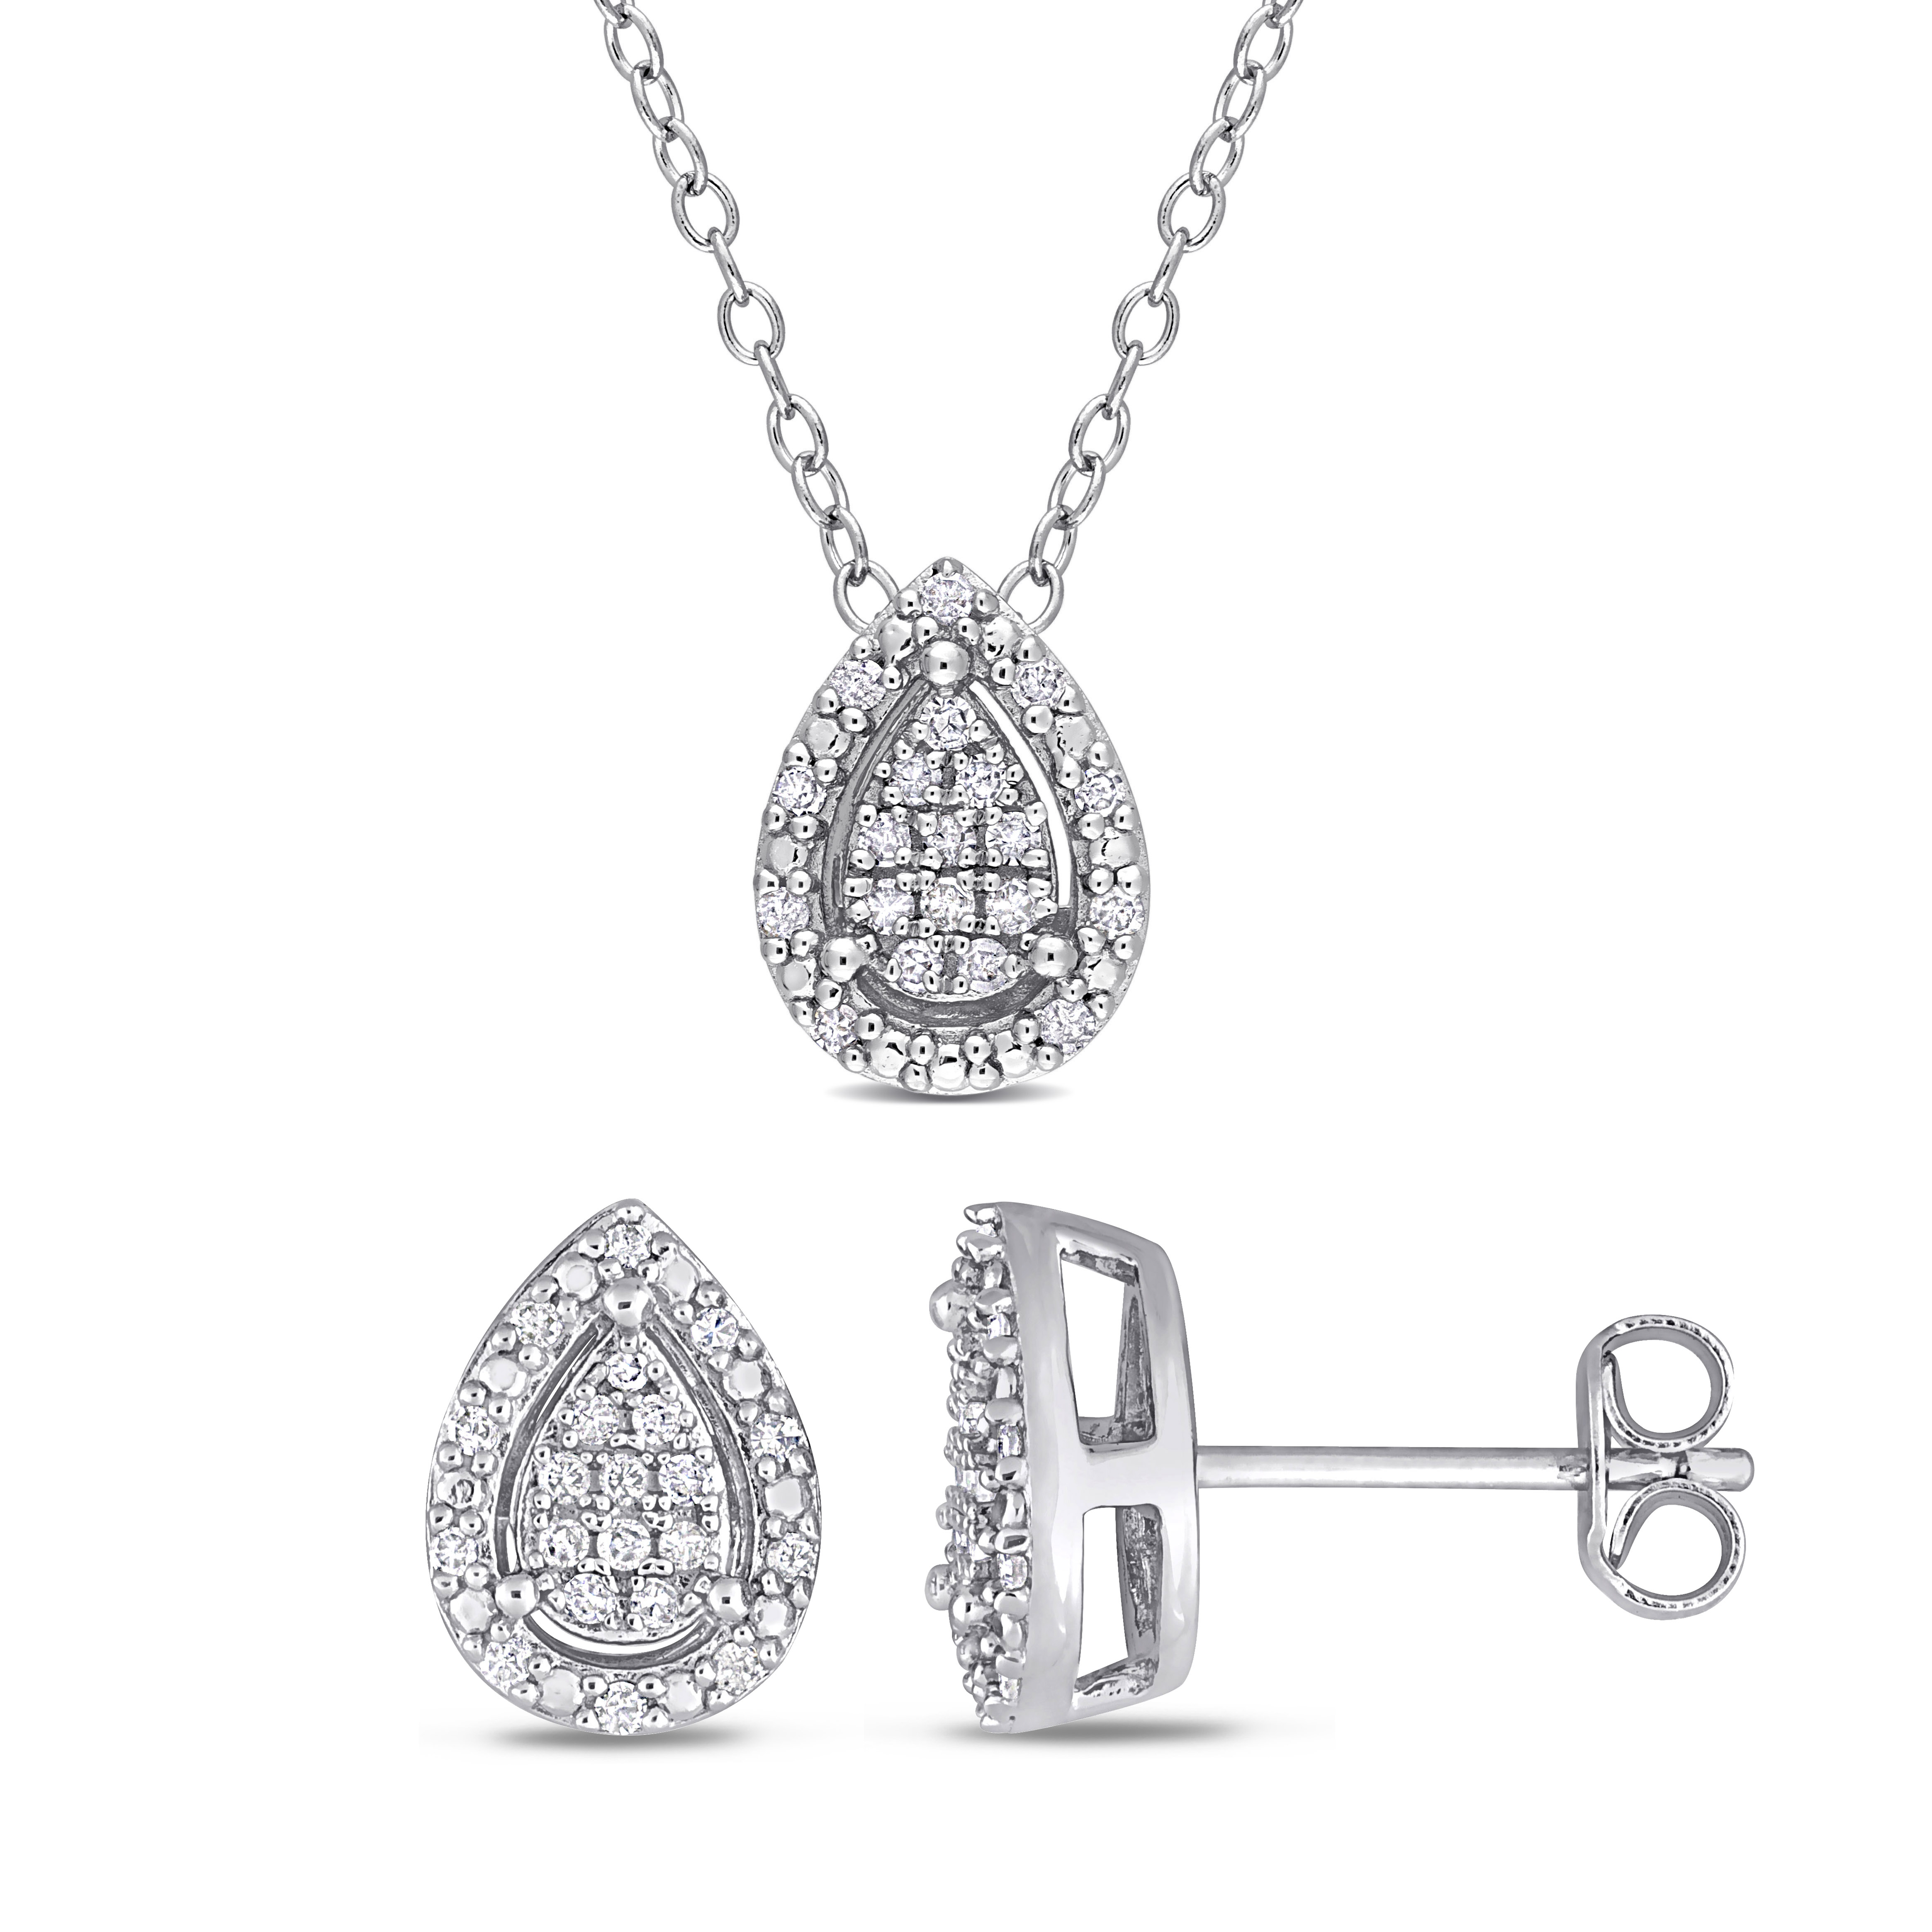 1/3 CT Diamond TW Fashion Earrings & Pendant With Chain in Sterlin in Sterling Silver